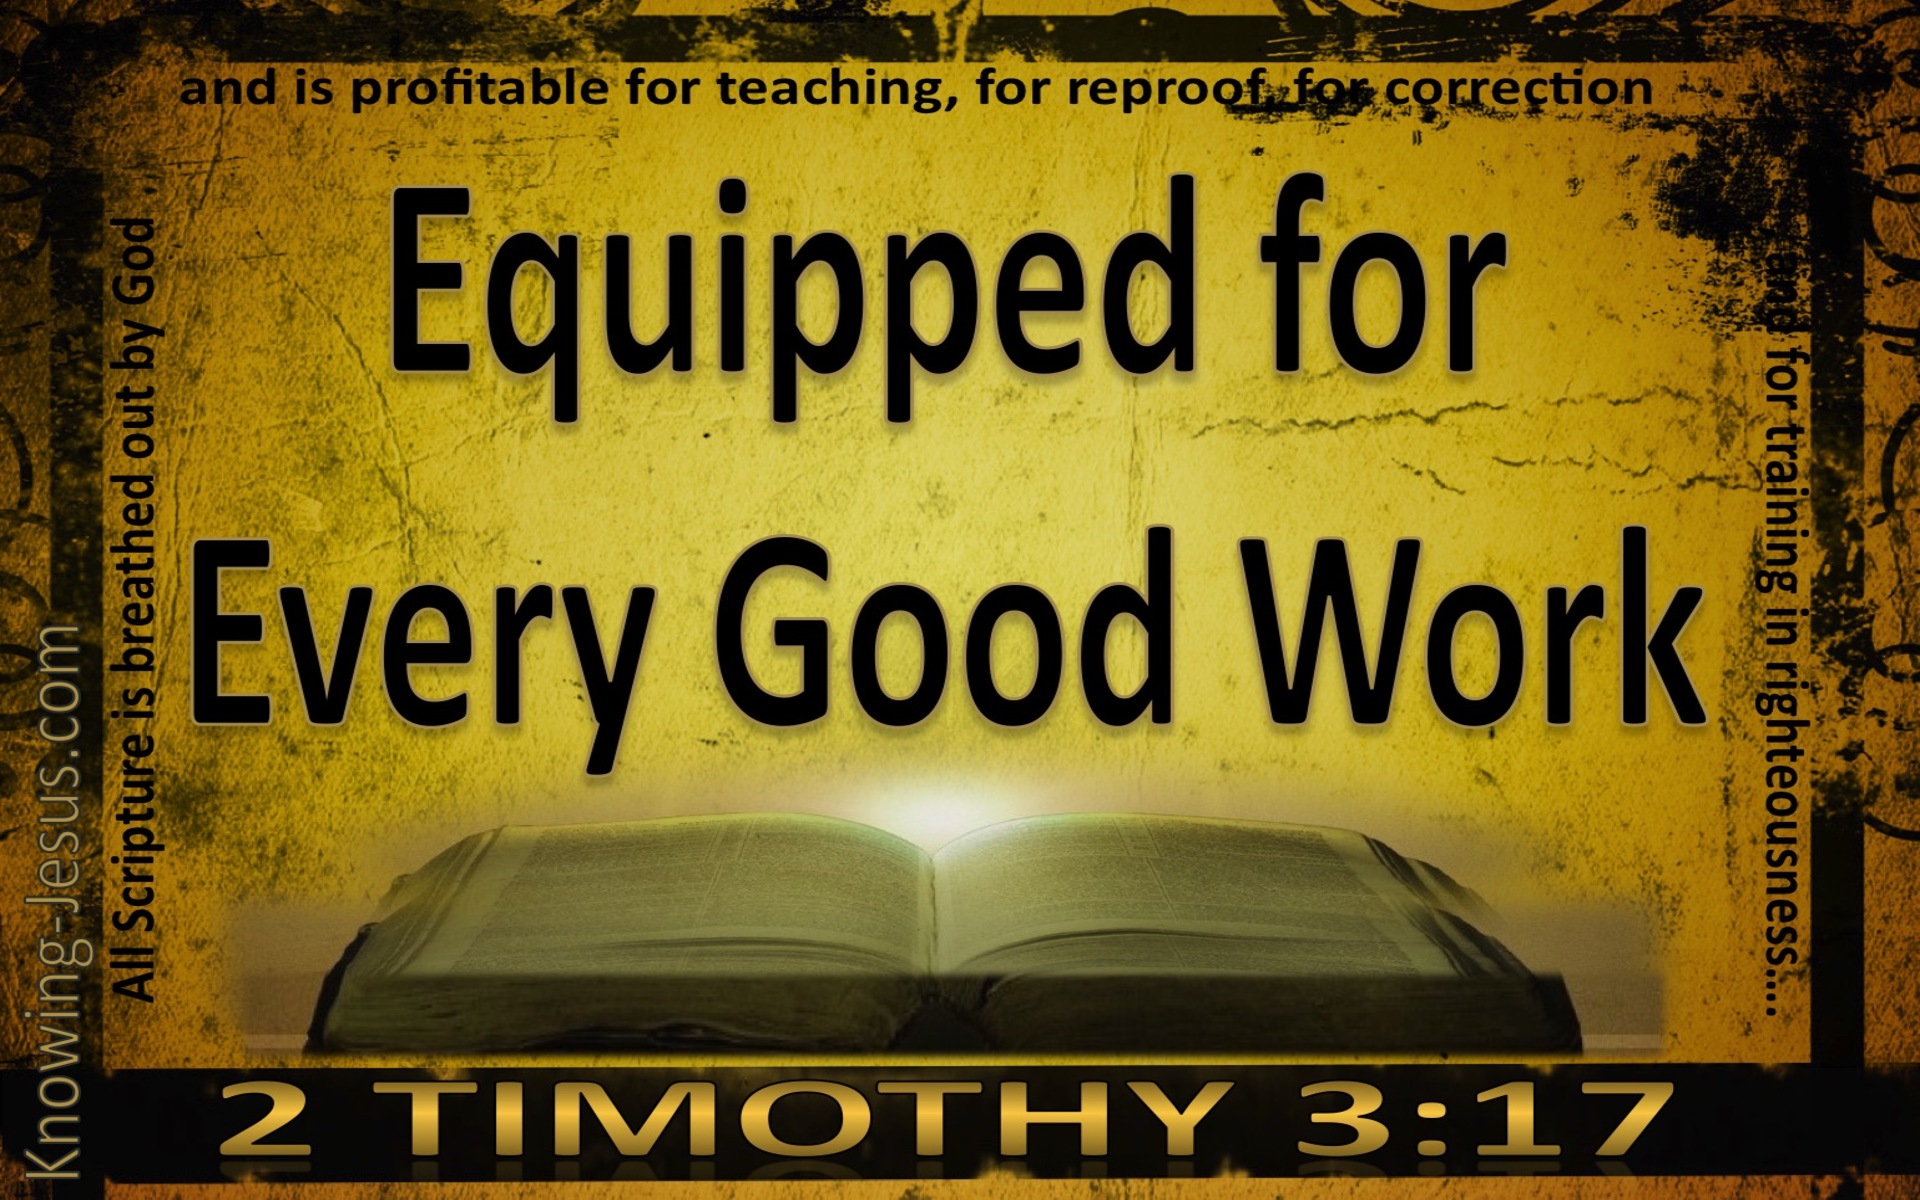 2 Timothy 3:17 That The Man Of God May Be Fully Equipped (yellow)